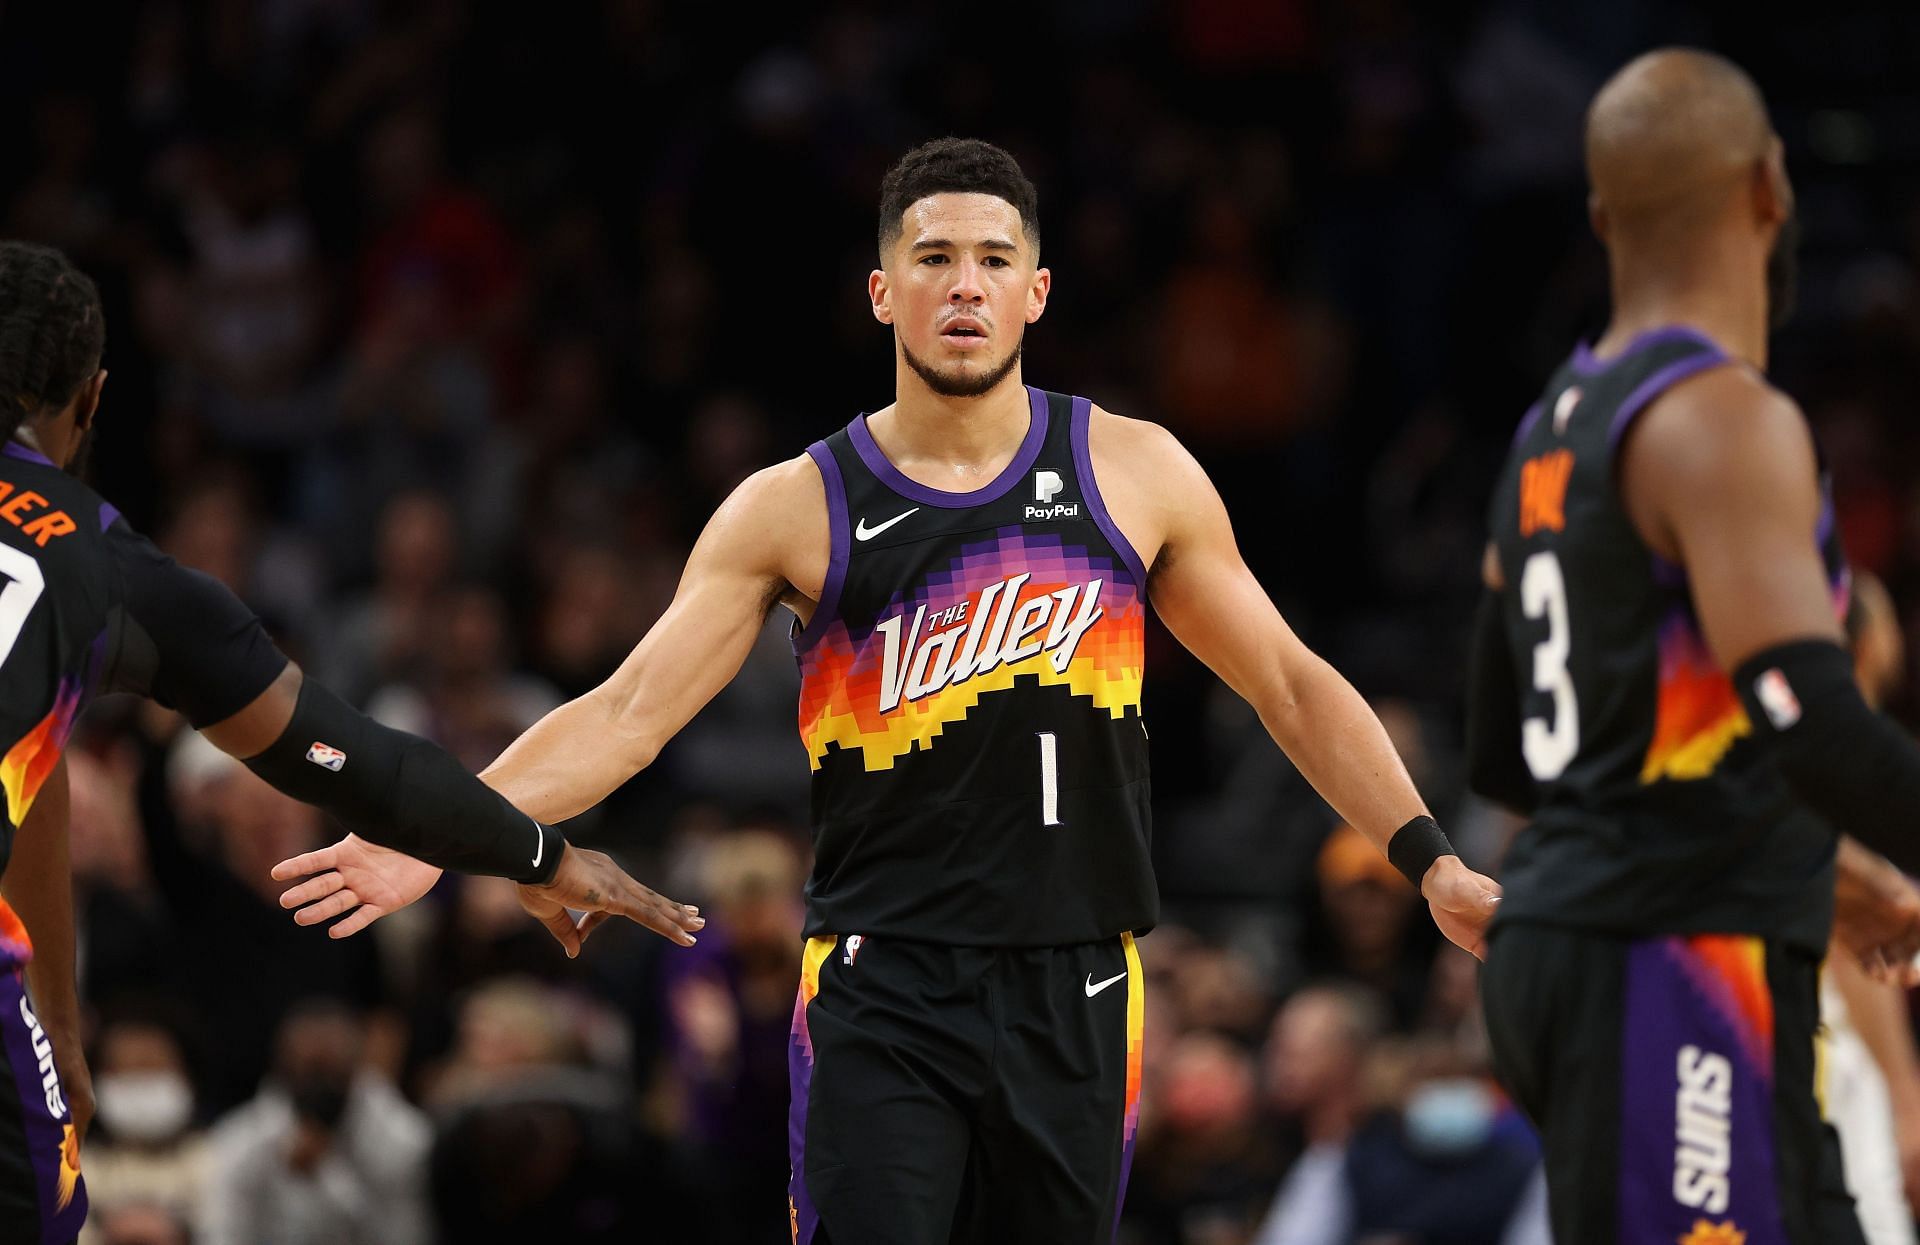 Devin Booker is expected to miss the game between the Golden State Warriors and Phoenix Suns